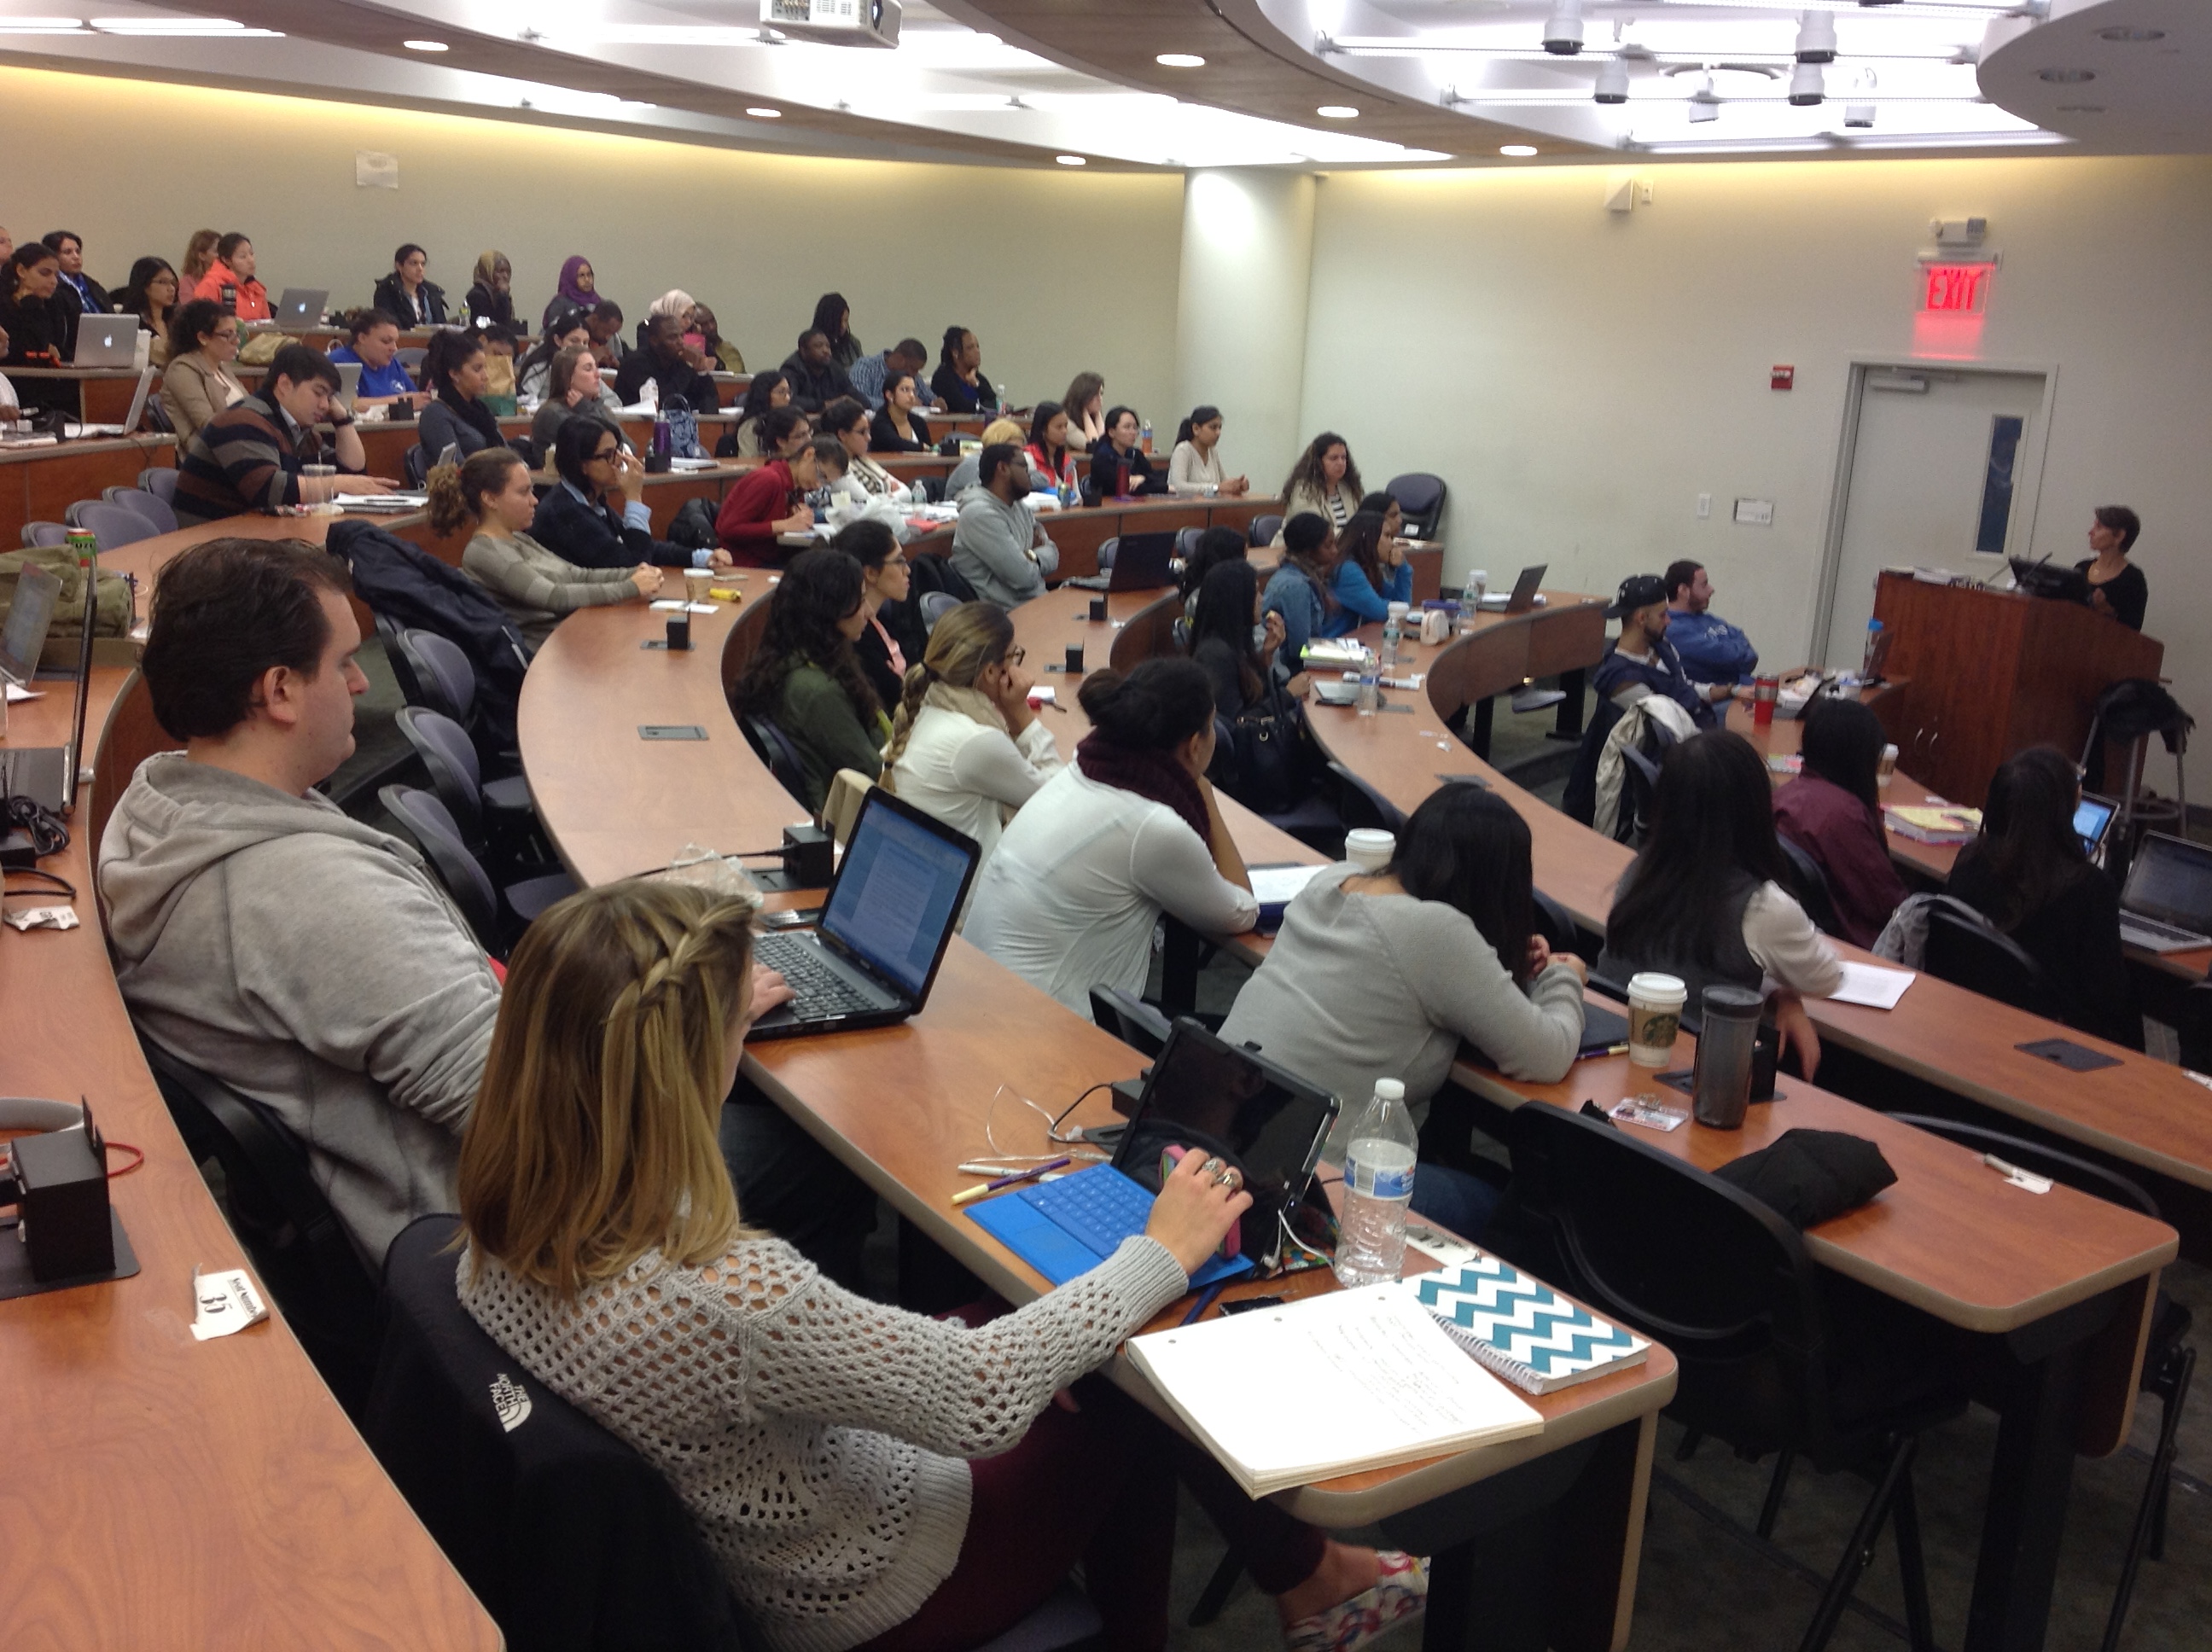 Touro College of Pharmacy students listened to guest speaker Joy Solomon, Esq. give tips on elder abuse prevention